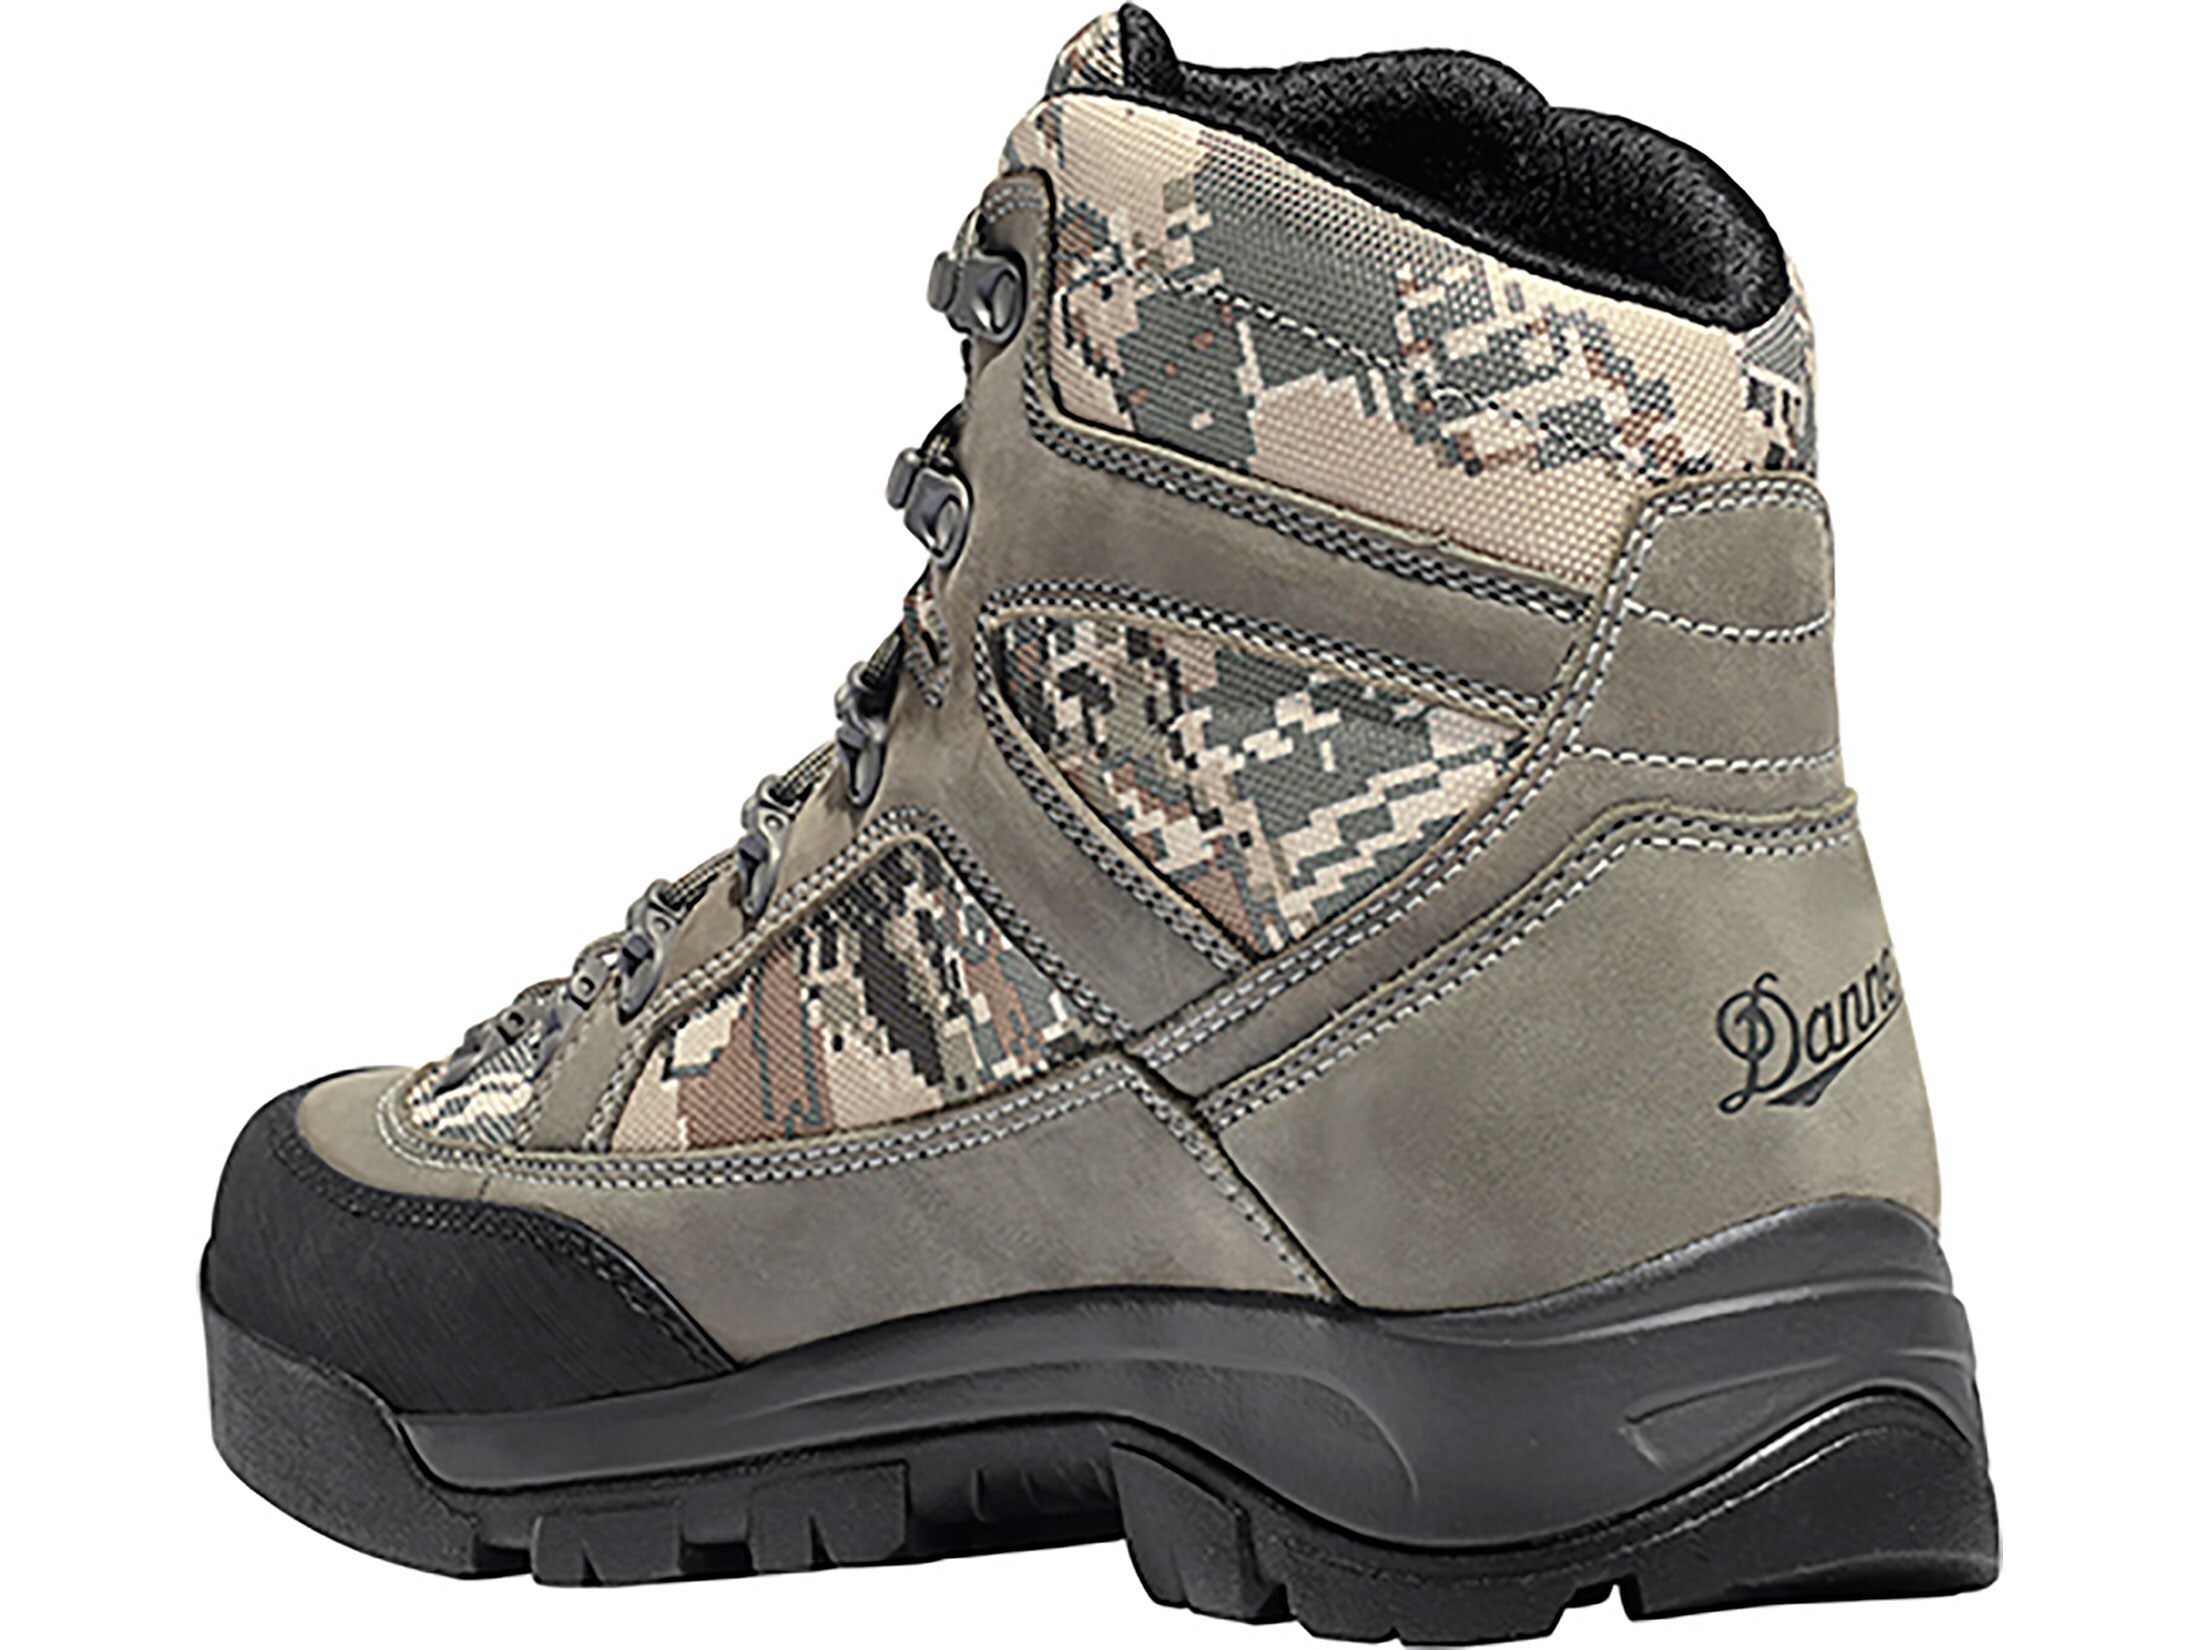 Danner Gila 6 GORE-TEX Hunting Boots Leather Nylon Optifade Open